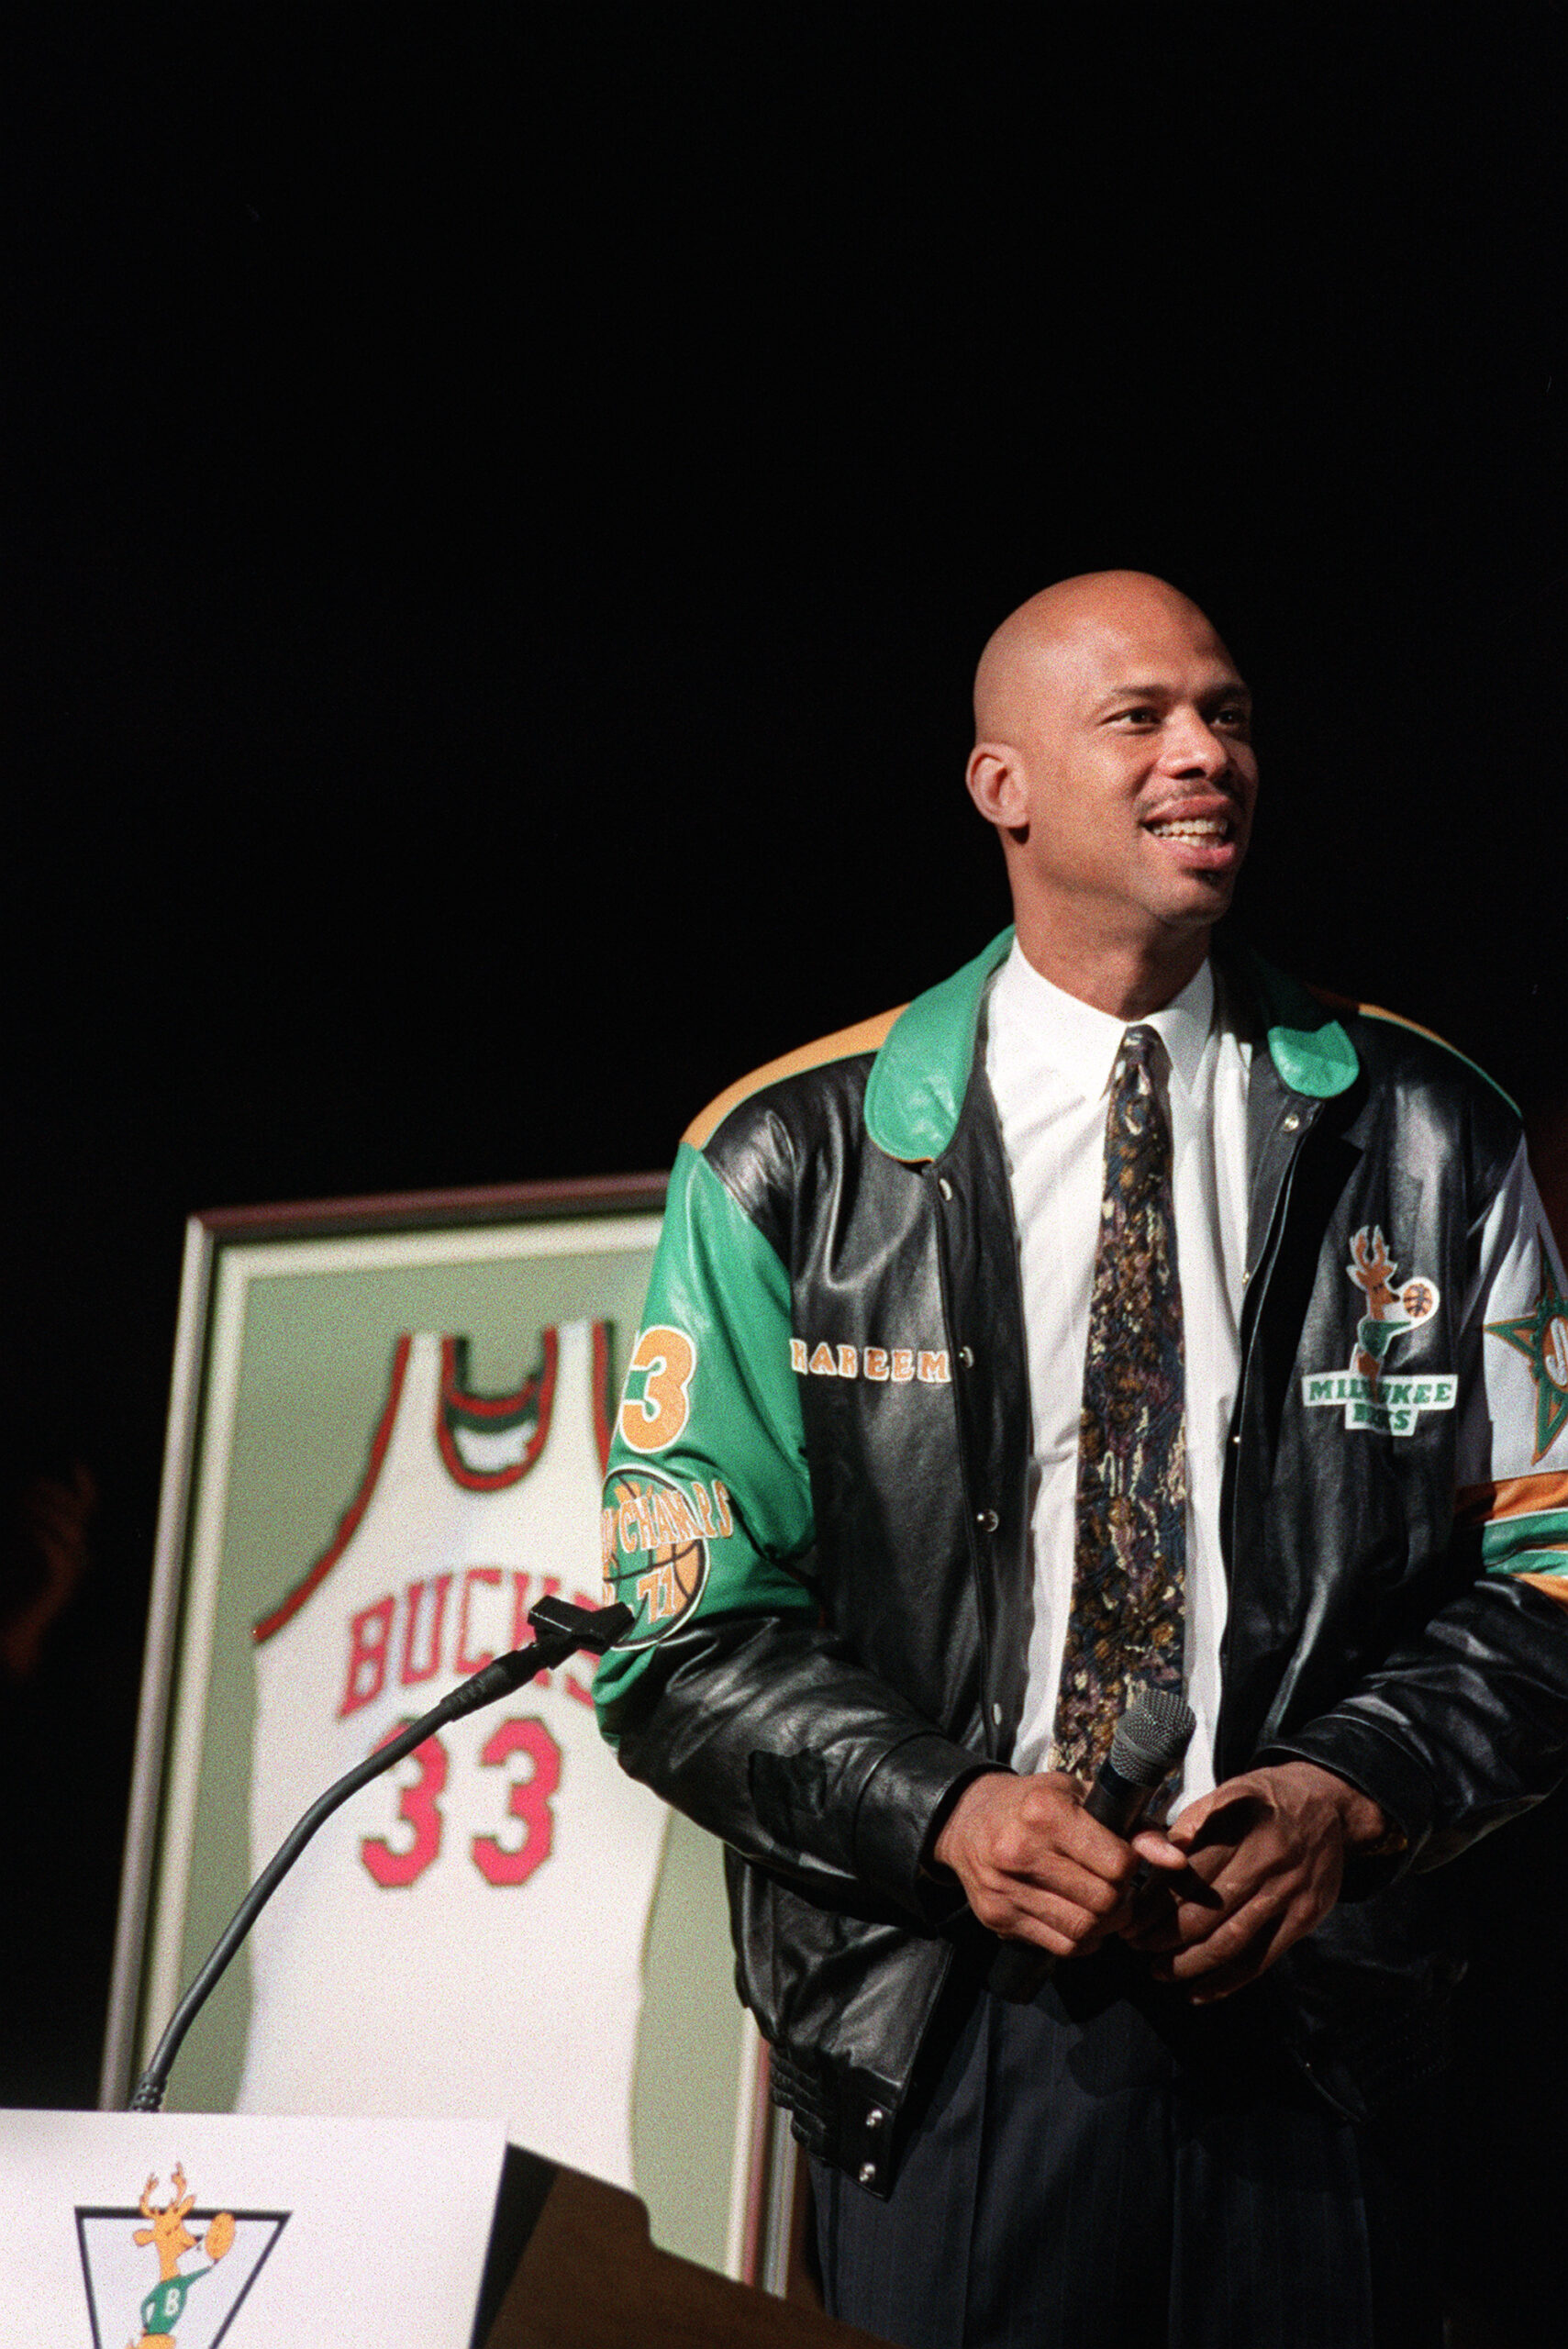 Kareem Abdul-Jabbar pauses while fans cheer as the Bucks retire his jersey